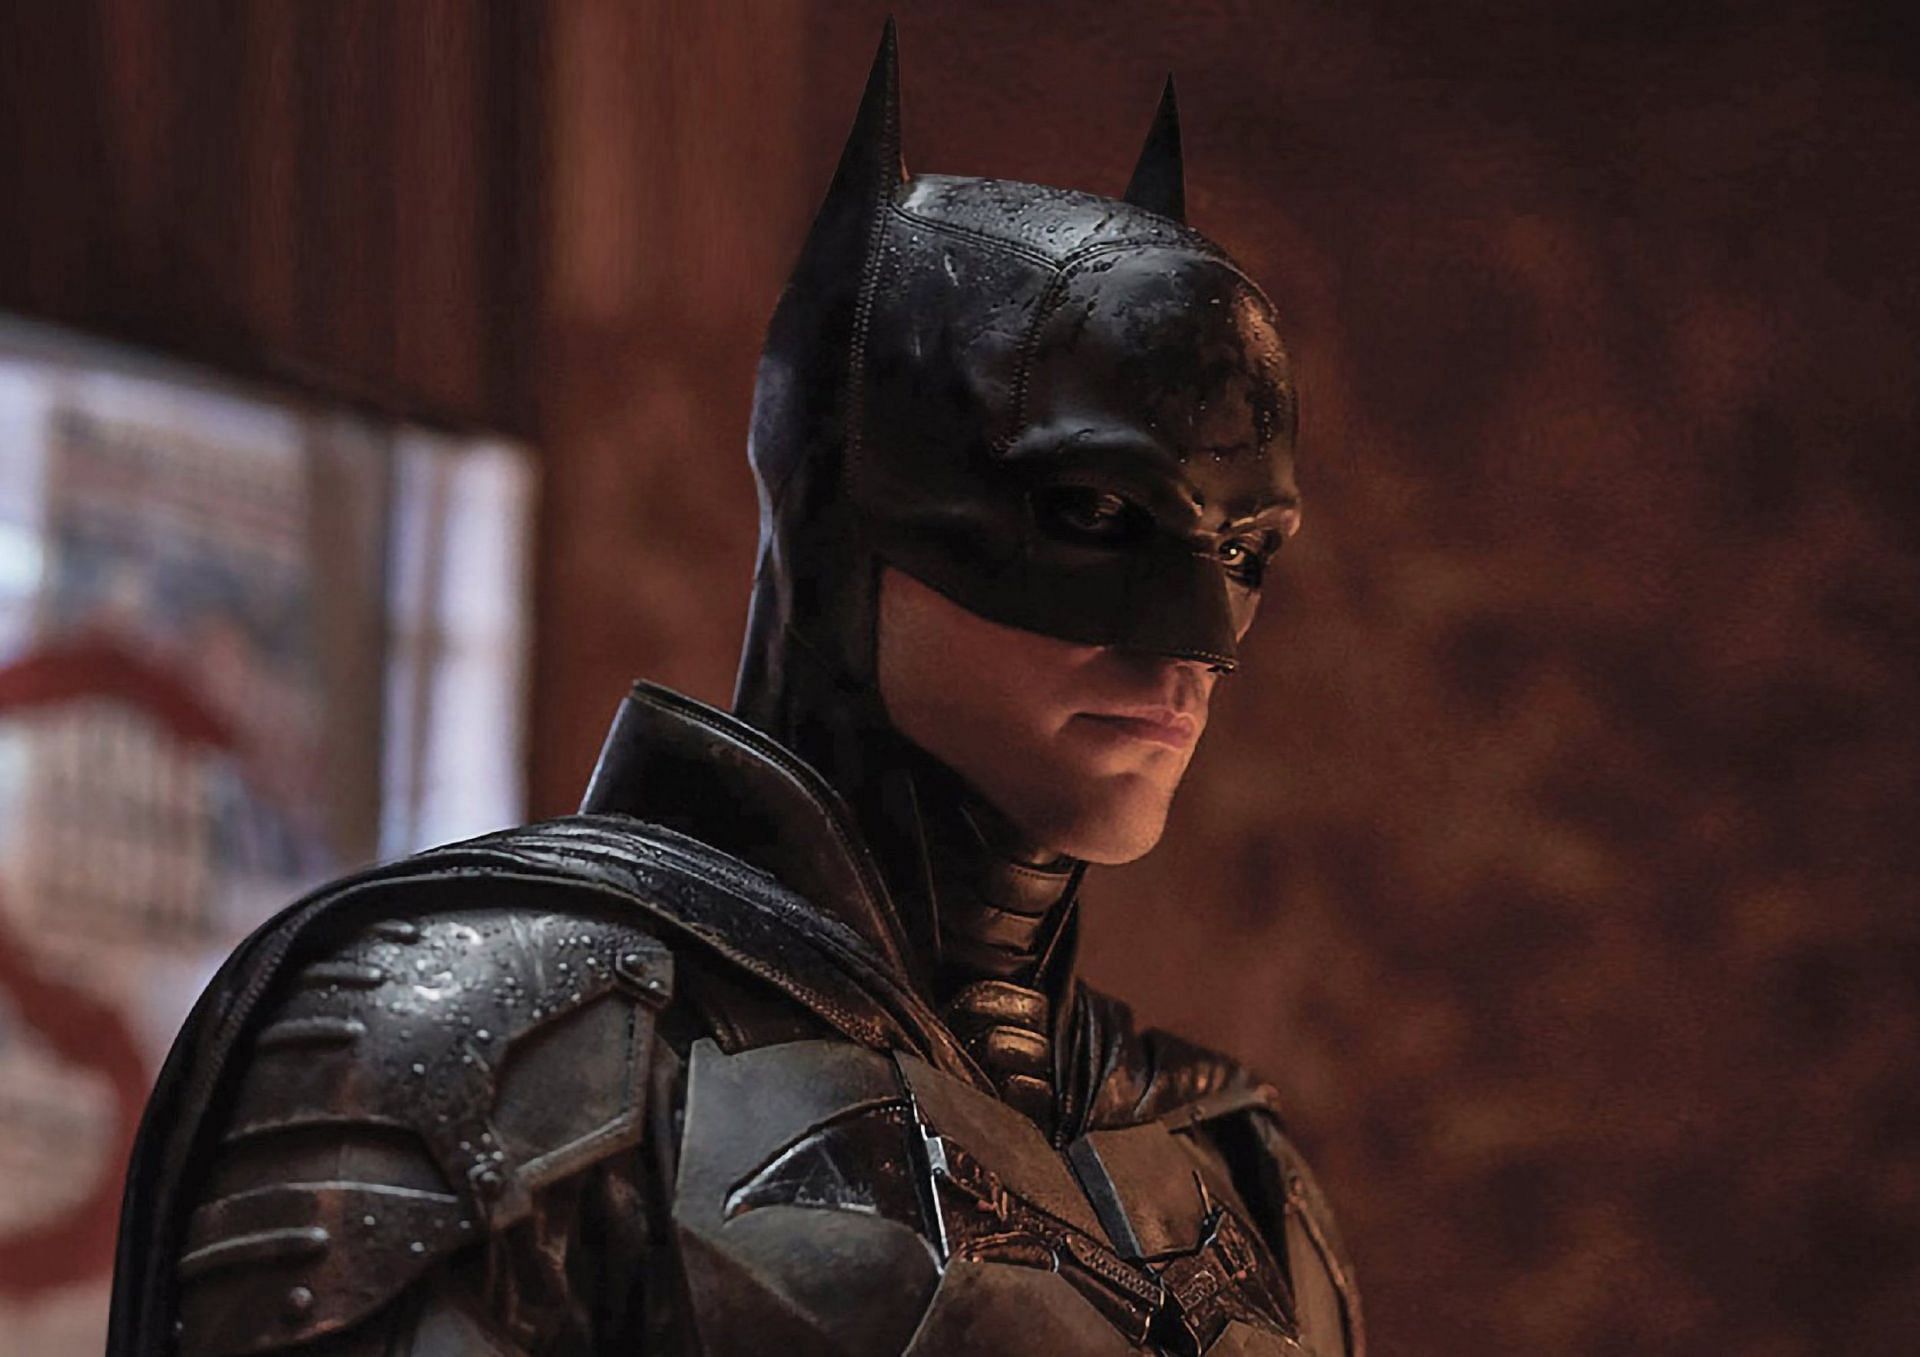 From tragedy to triumph: The impact of Bruce Wayne's trauma on his journey  as Batman